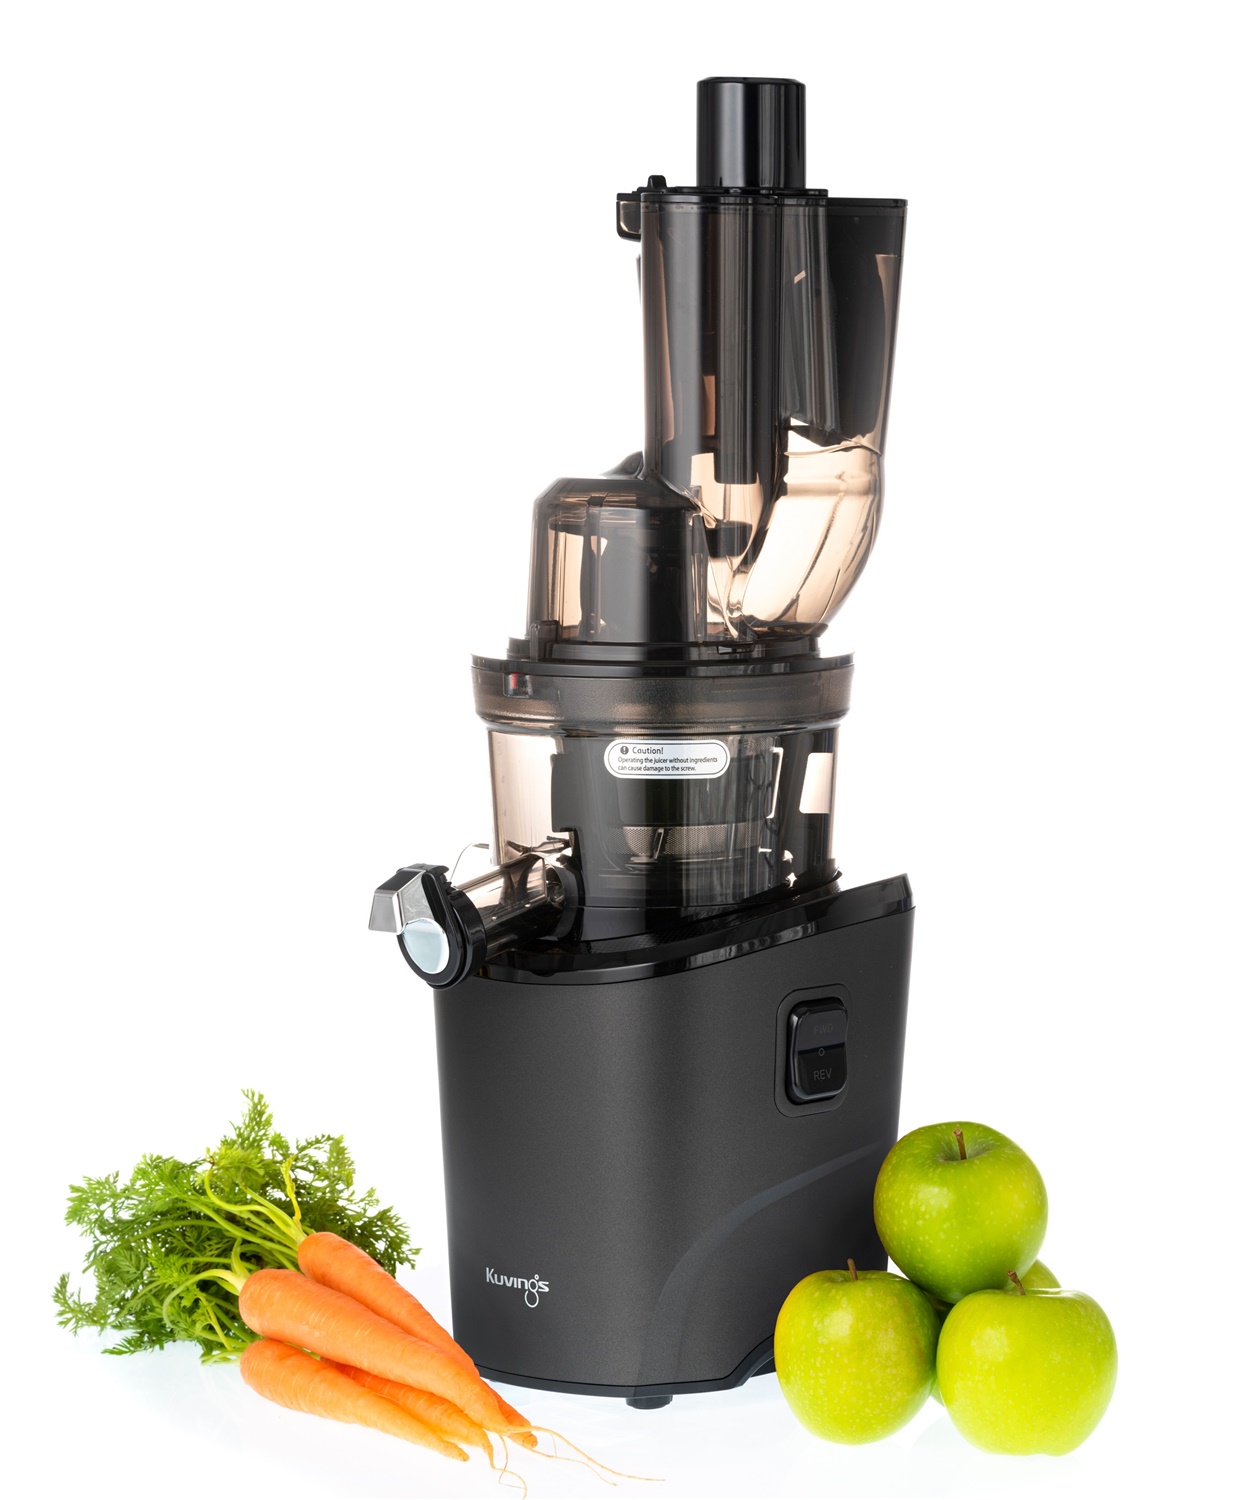 CUH Whole Fruit Vegetable Slow Juicer with Quiet Motor for High Juice Extraction Luxury Purple Stainless Steel Finish 